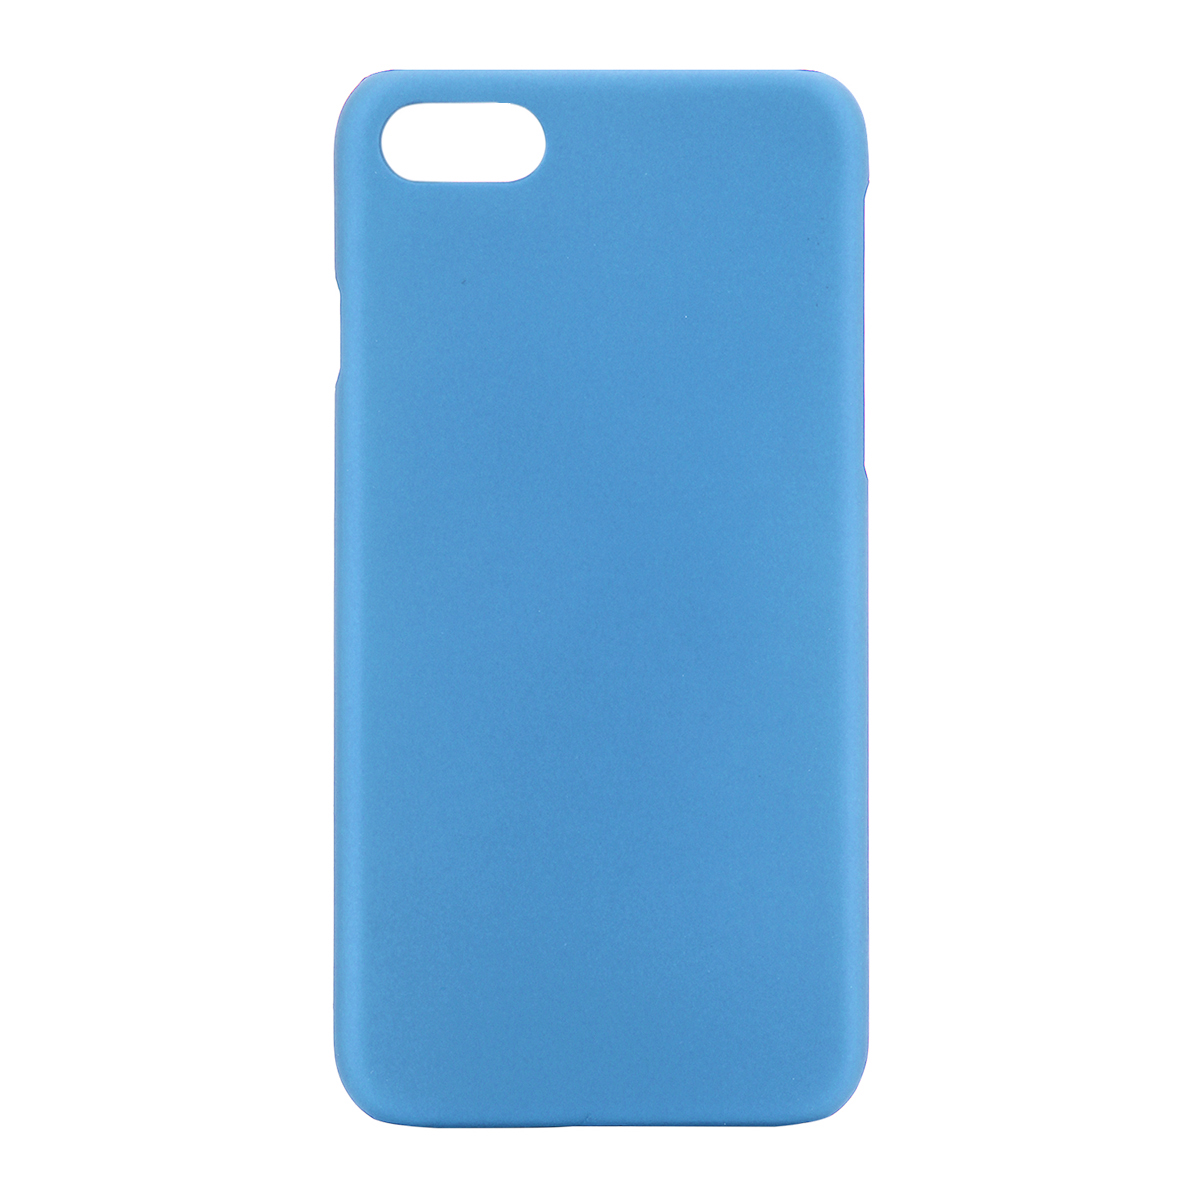 Multicolor Frosted Hard PC Protective Back Phone Case for iPhone 6s - Blue